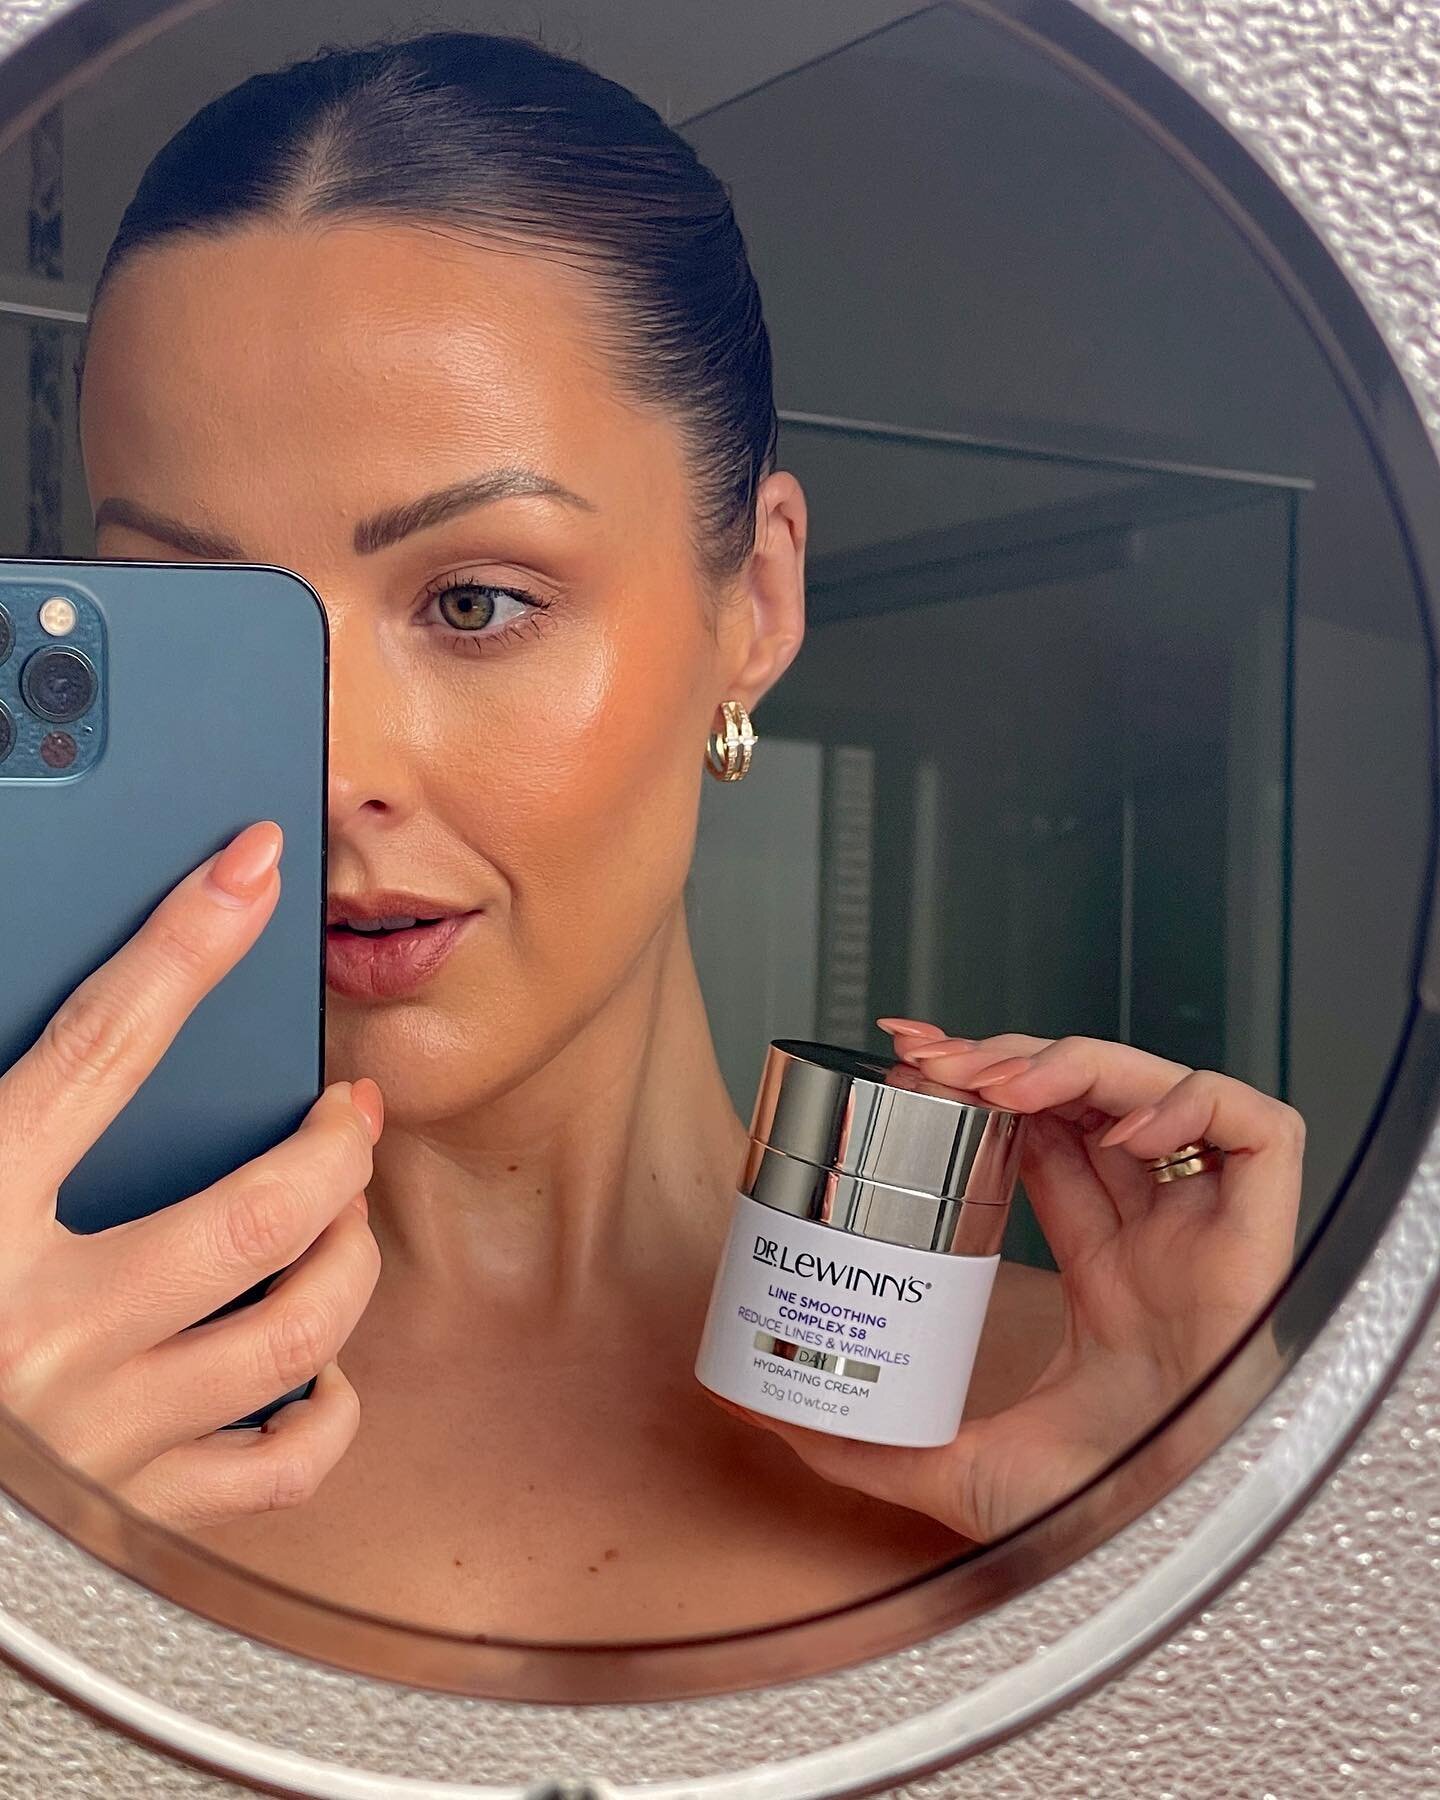 &quot;I've always said that the best way to achieve a glowy base is to spend that 1 minute in the morning popping on your skincare, trust me! It makes the BIGGEST difference!&quot;

@rachel_de_oliveira has nailed her glowy skin base with the @drlewin